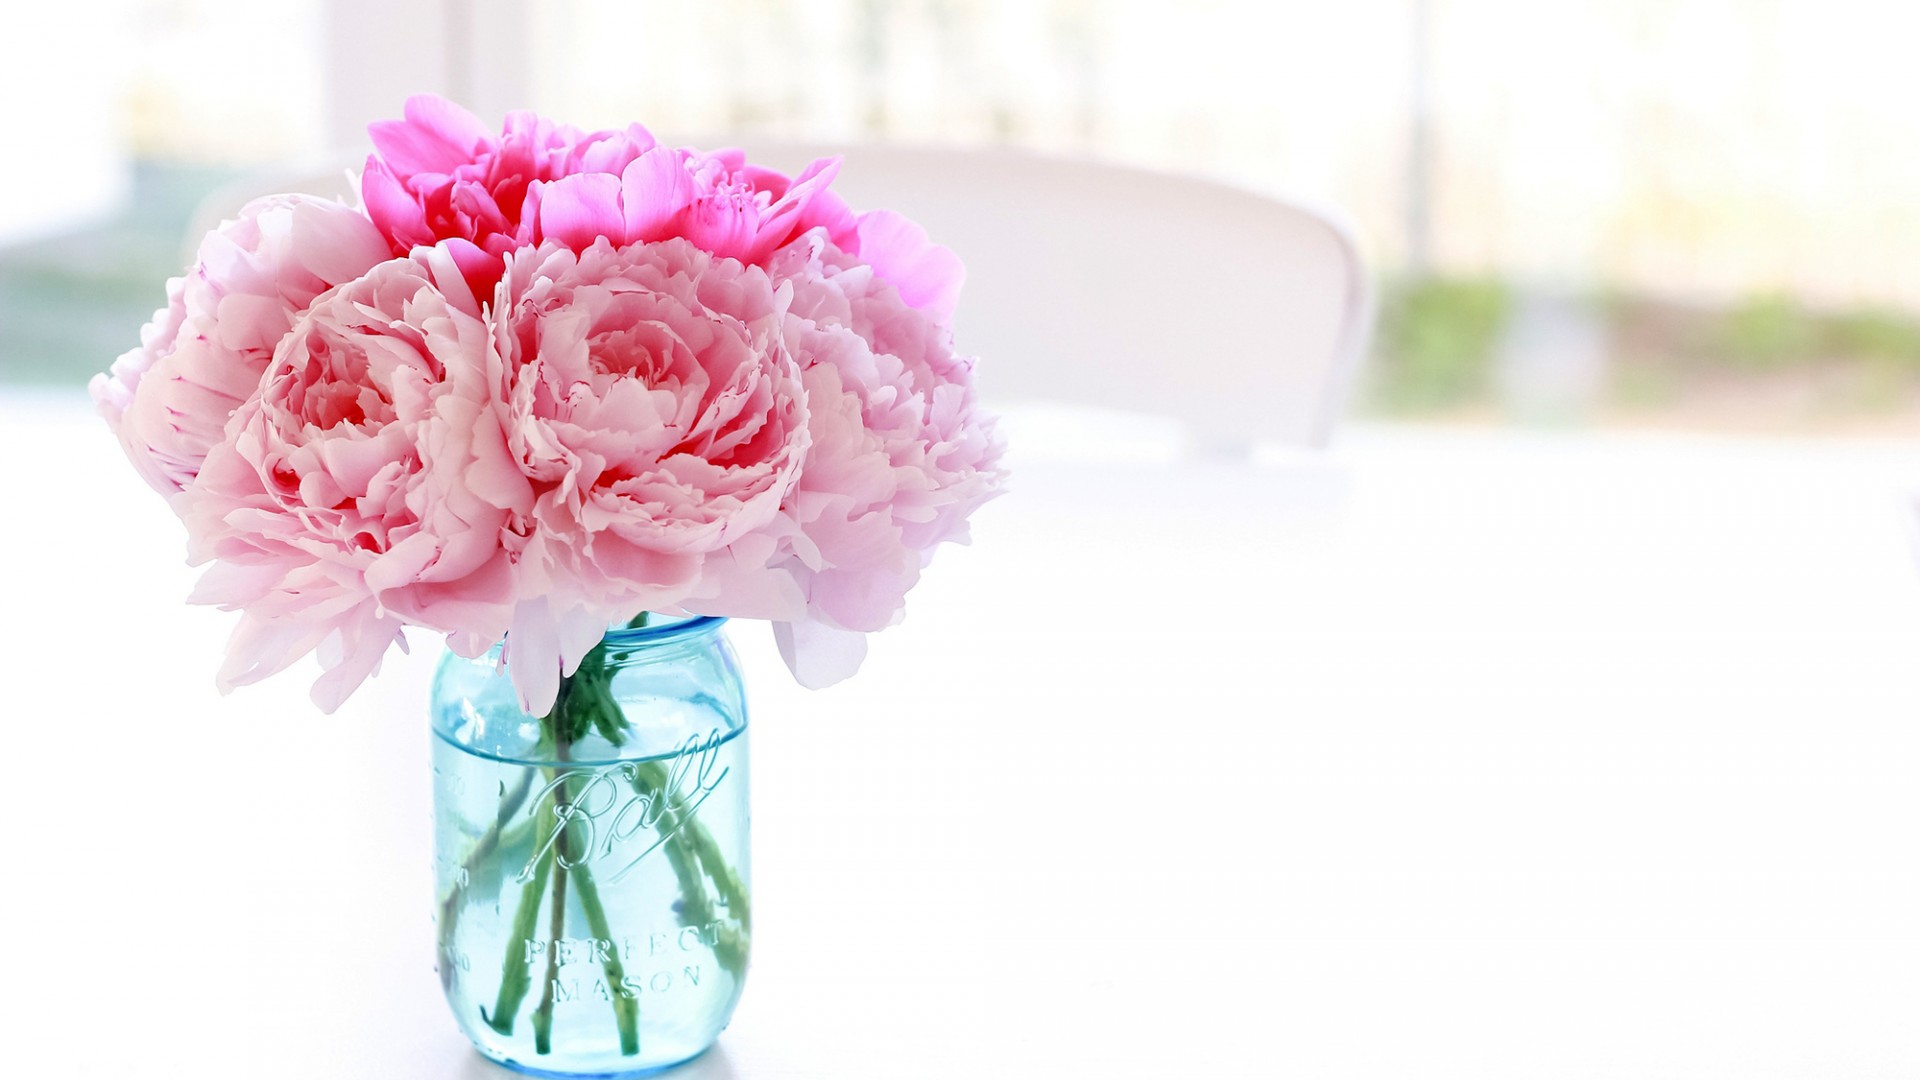 Wallpaper Bouquet Peony Bank Pale Pink Peonies In A